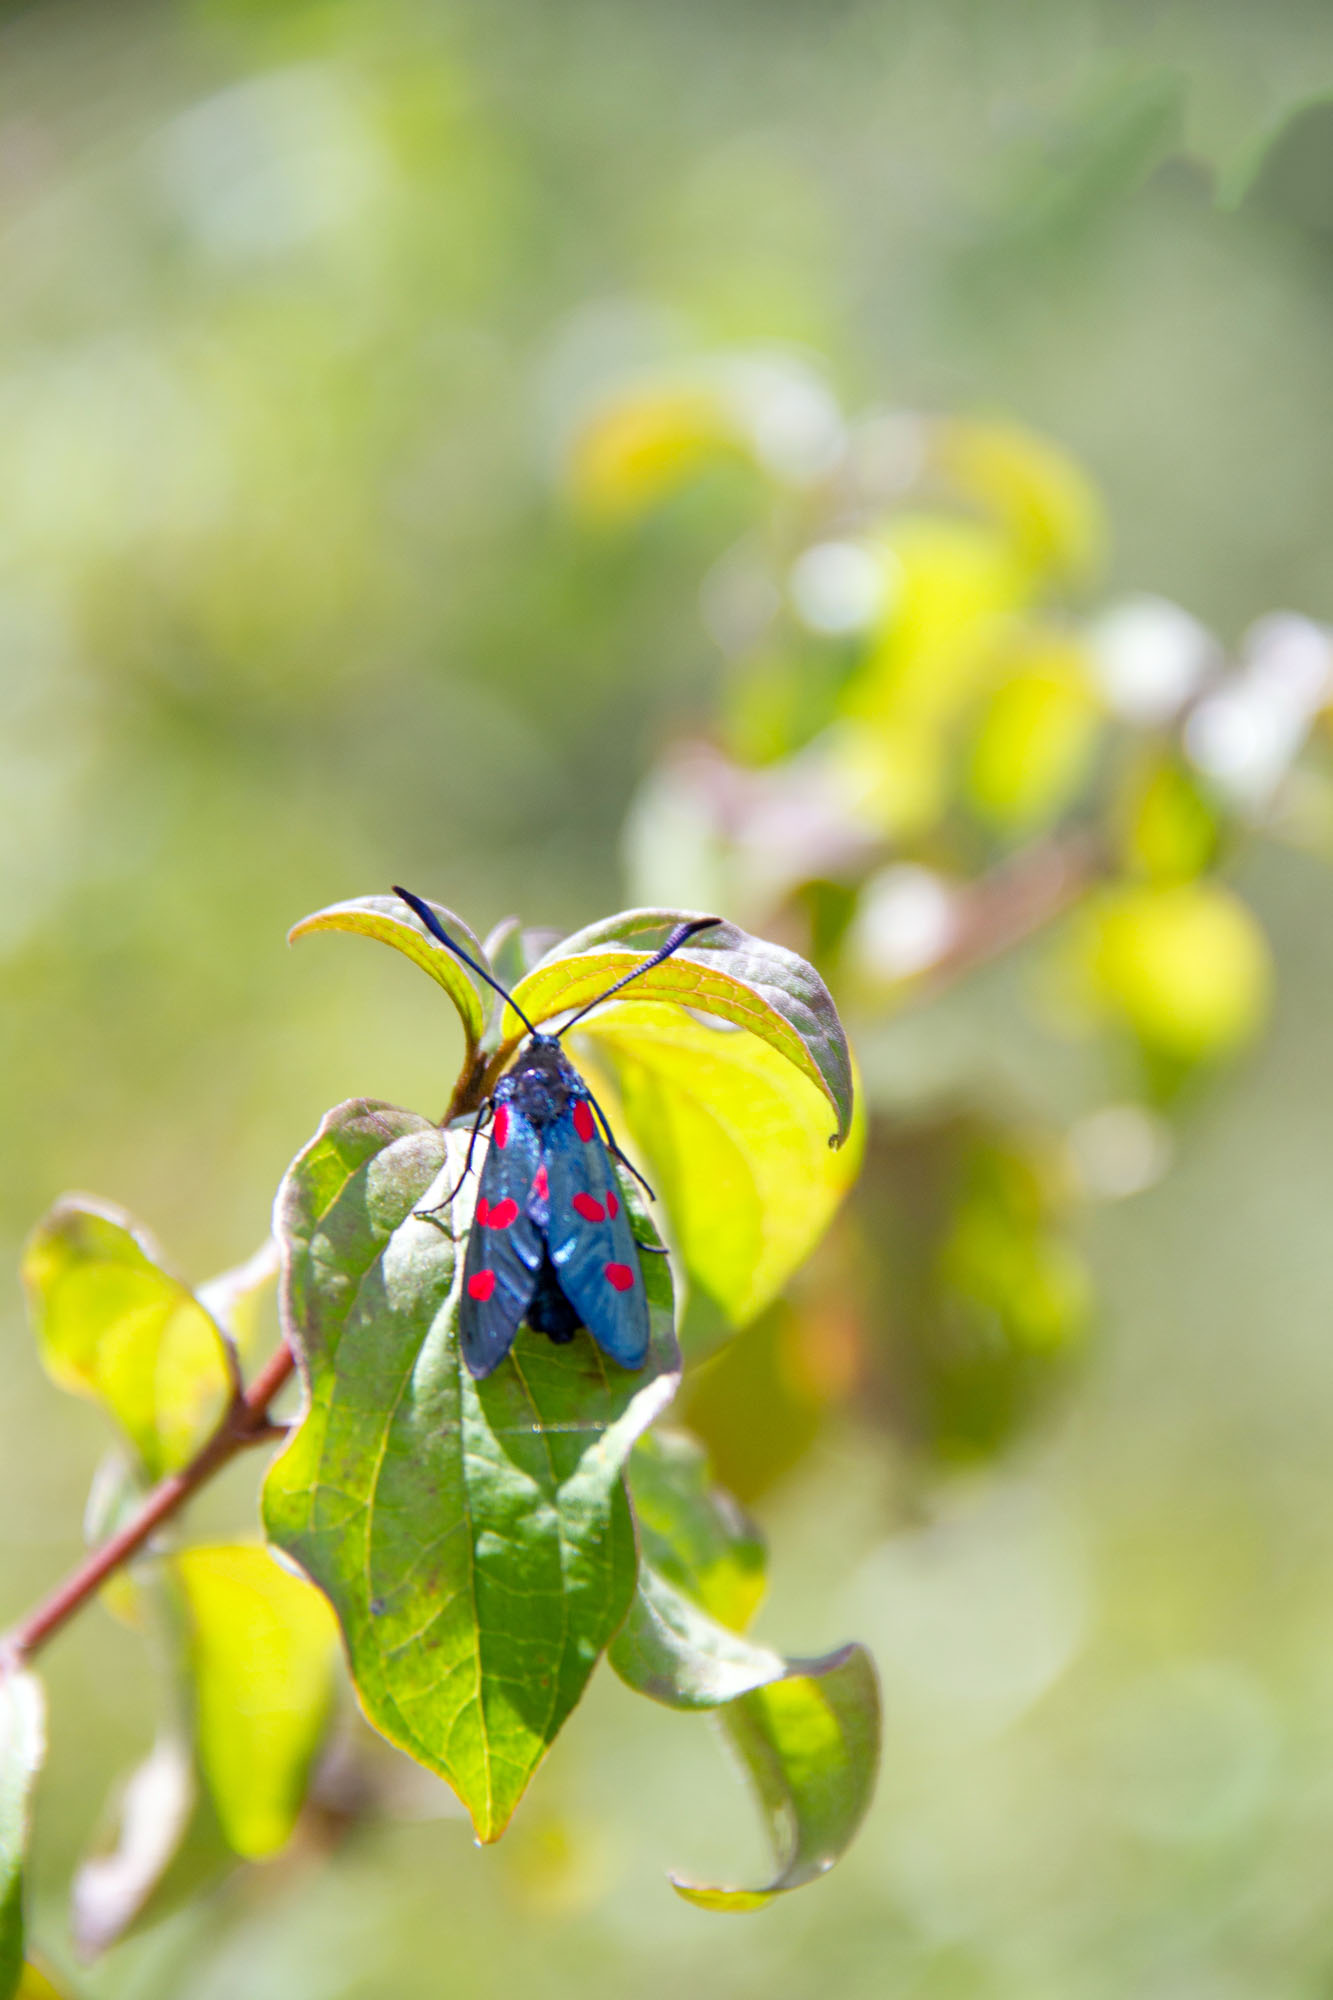 Blue bug with red dots